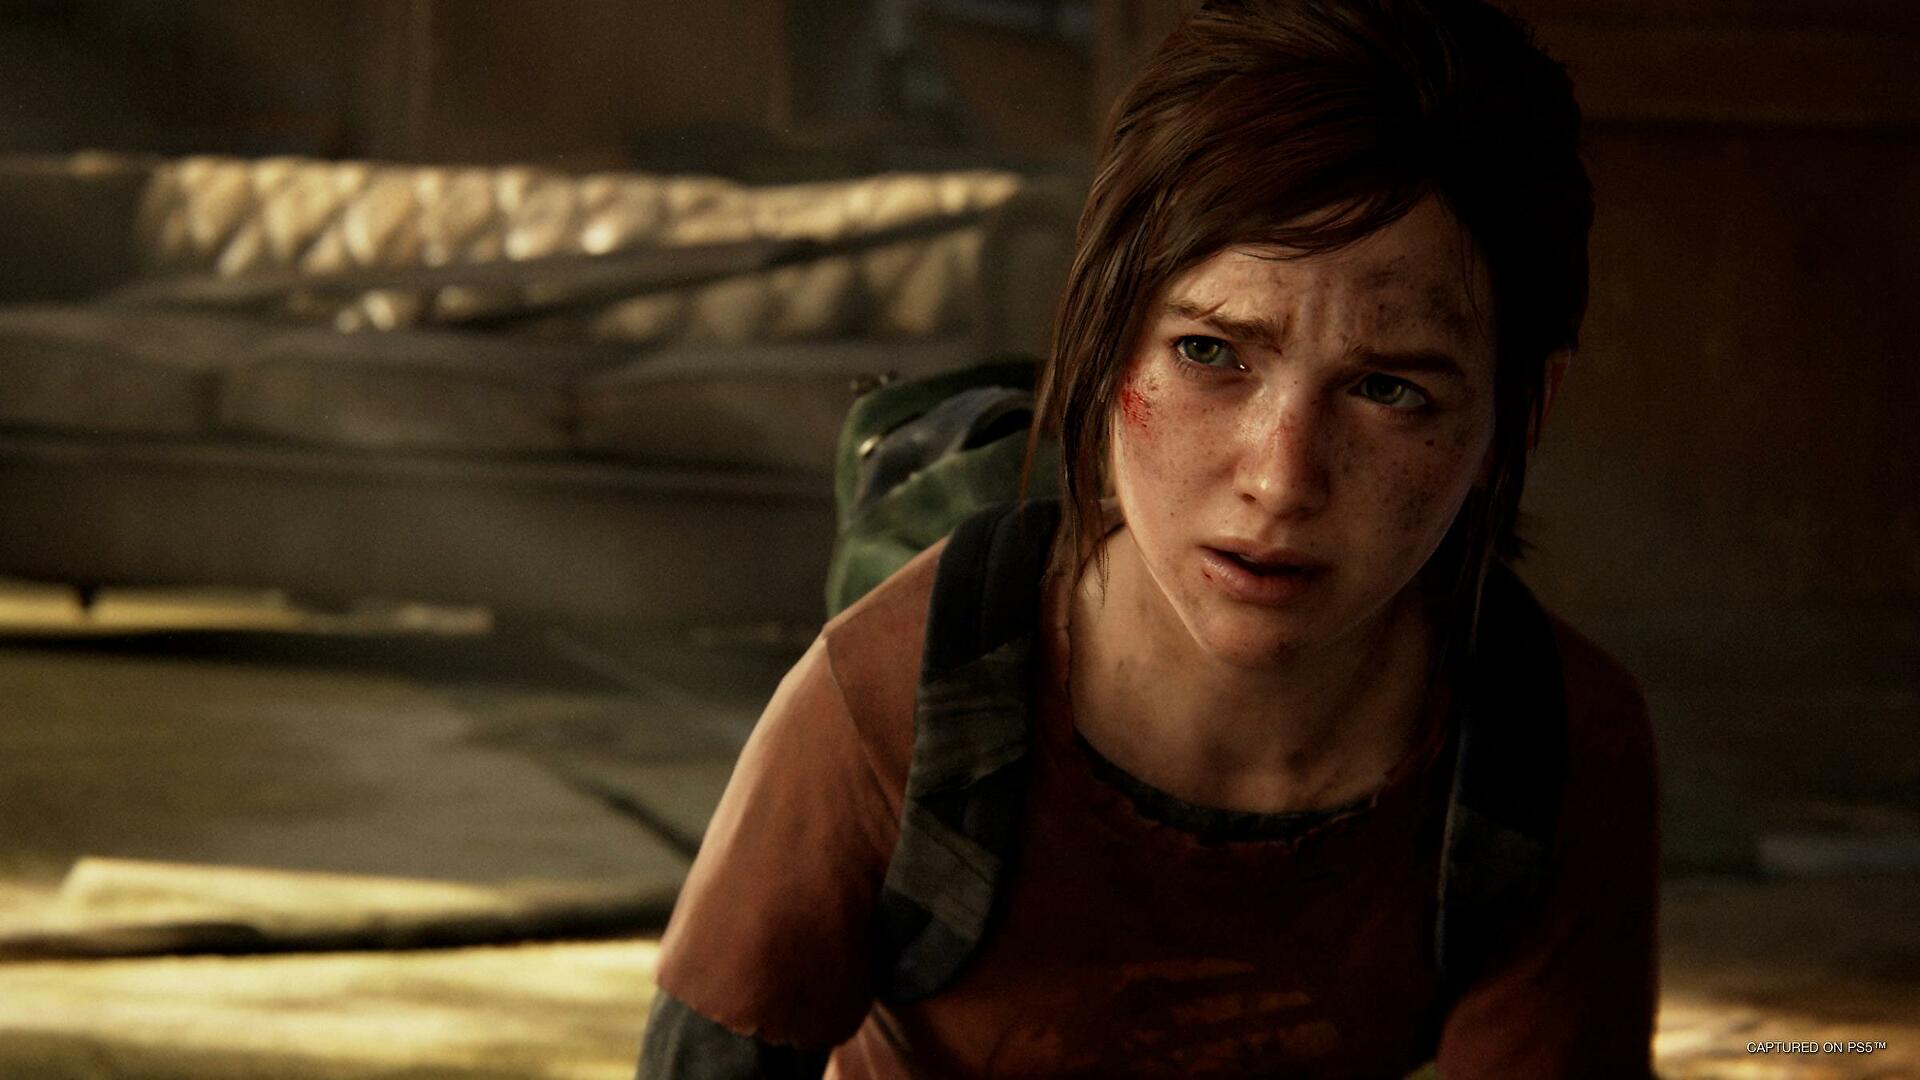 The Last of Us Part 1 Remake review embargo lifts soon